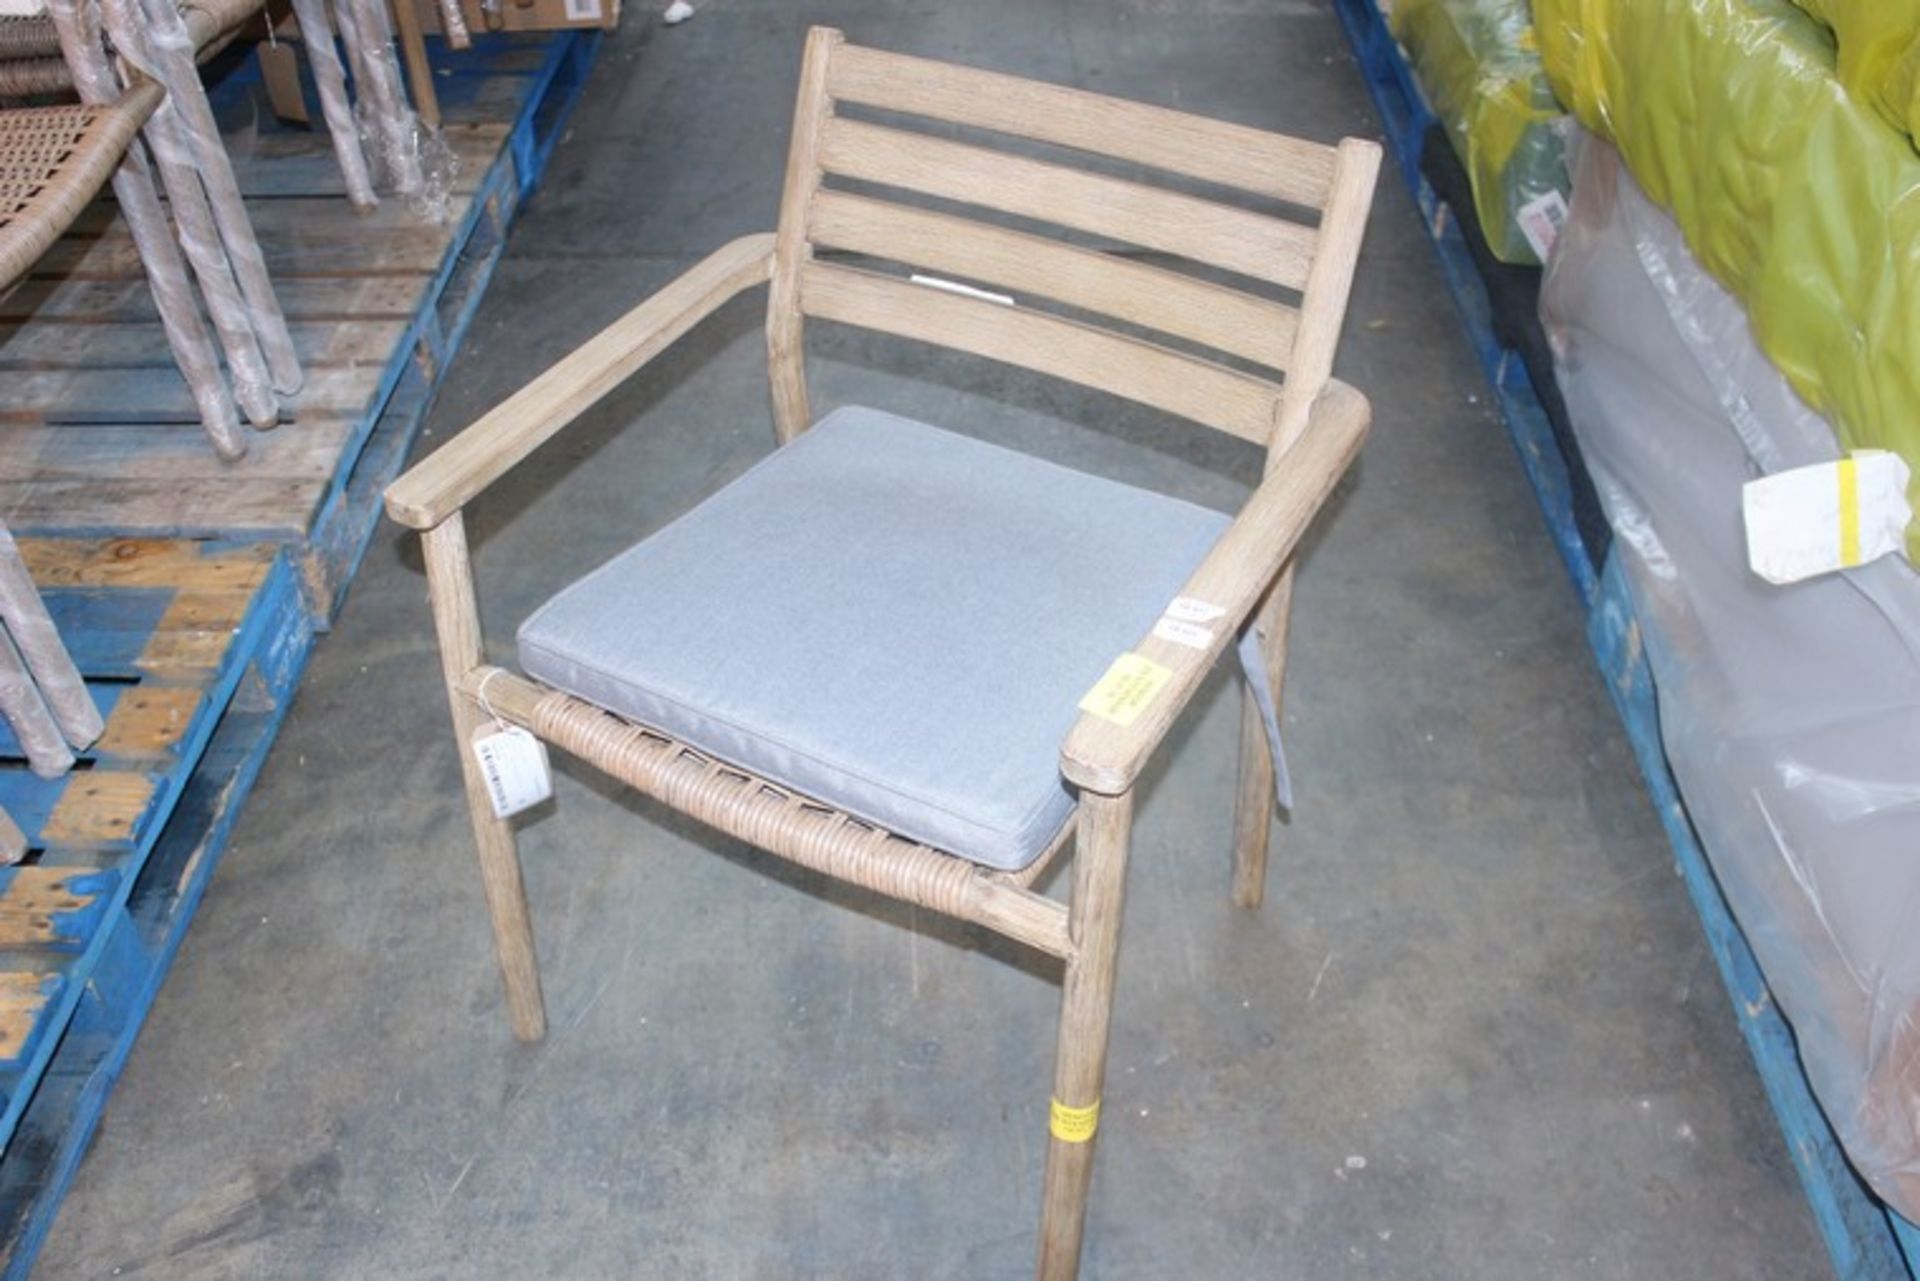 1 x ISLAY GARDEN DINING CHAIR (16.01.18) (82034602) (WITH CUSHIONS) *PLEASE NOTE THAT THE BID